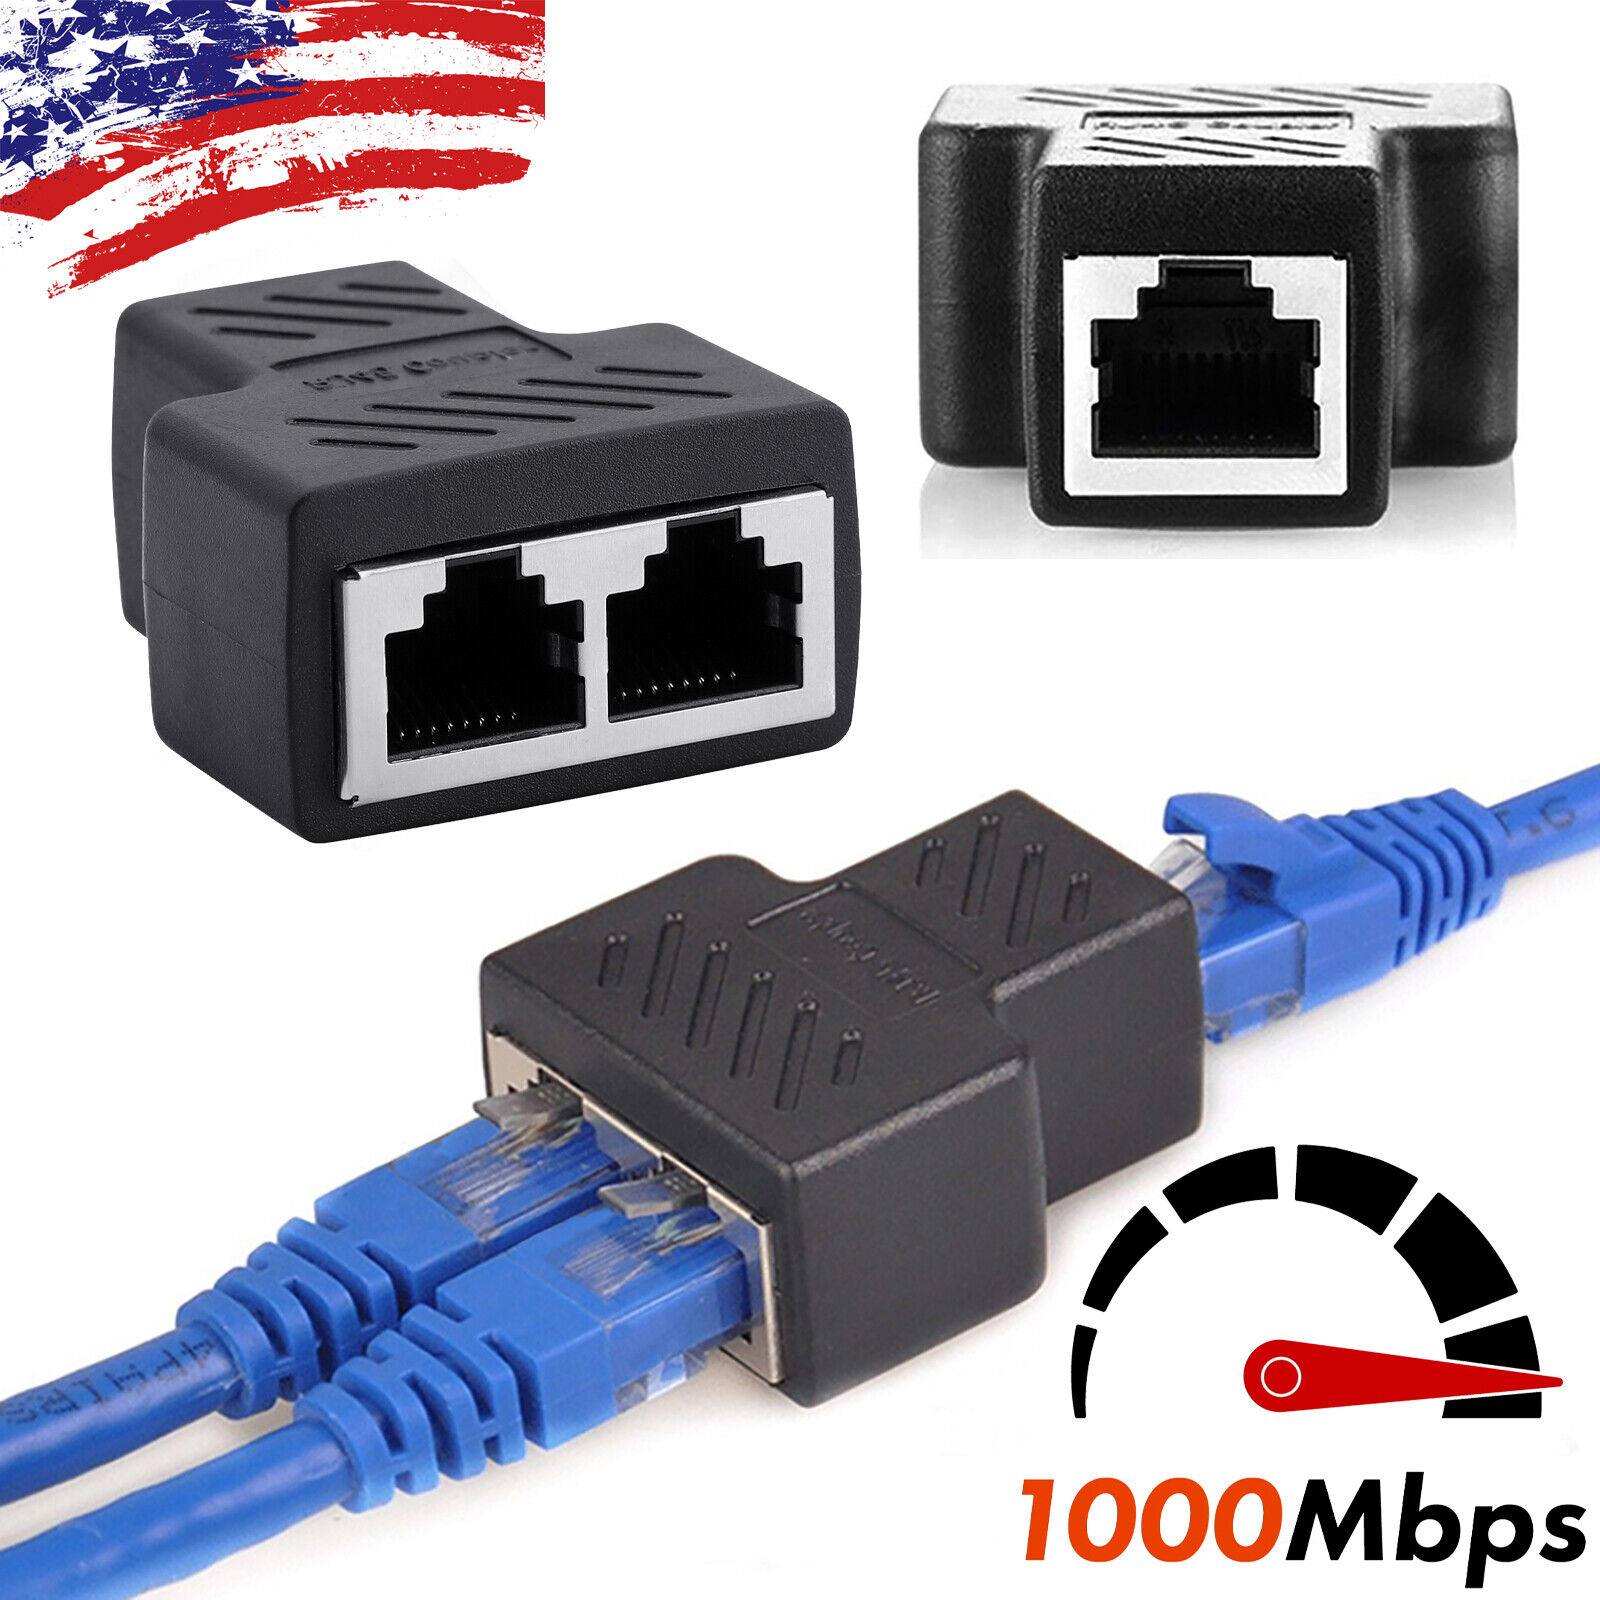 RJ45 Splitter Adapter 1 to 2 Ways Dual Female Port CAT6/5/7 LAN Ethernet Cable